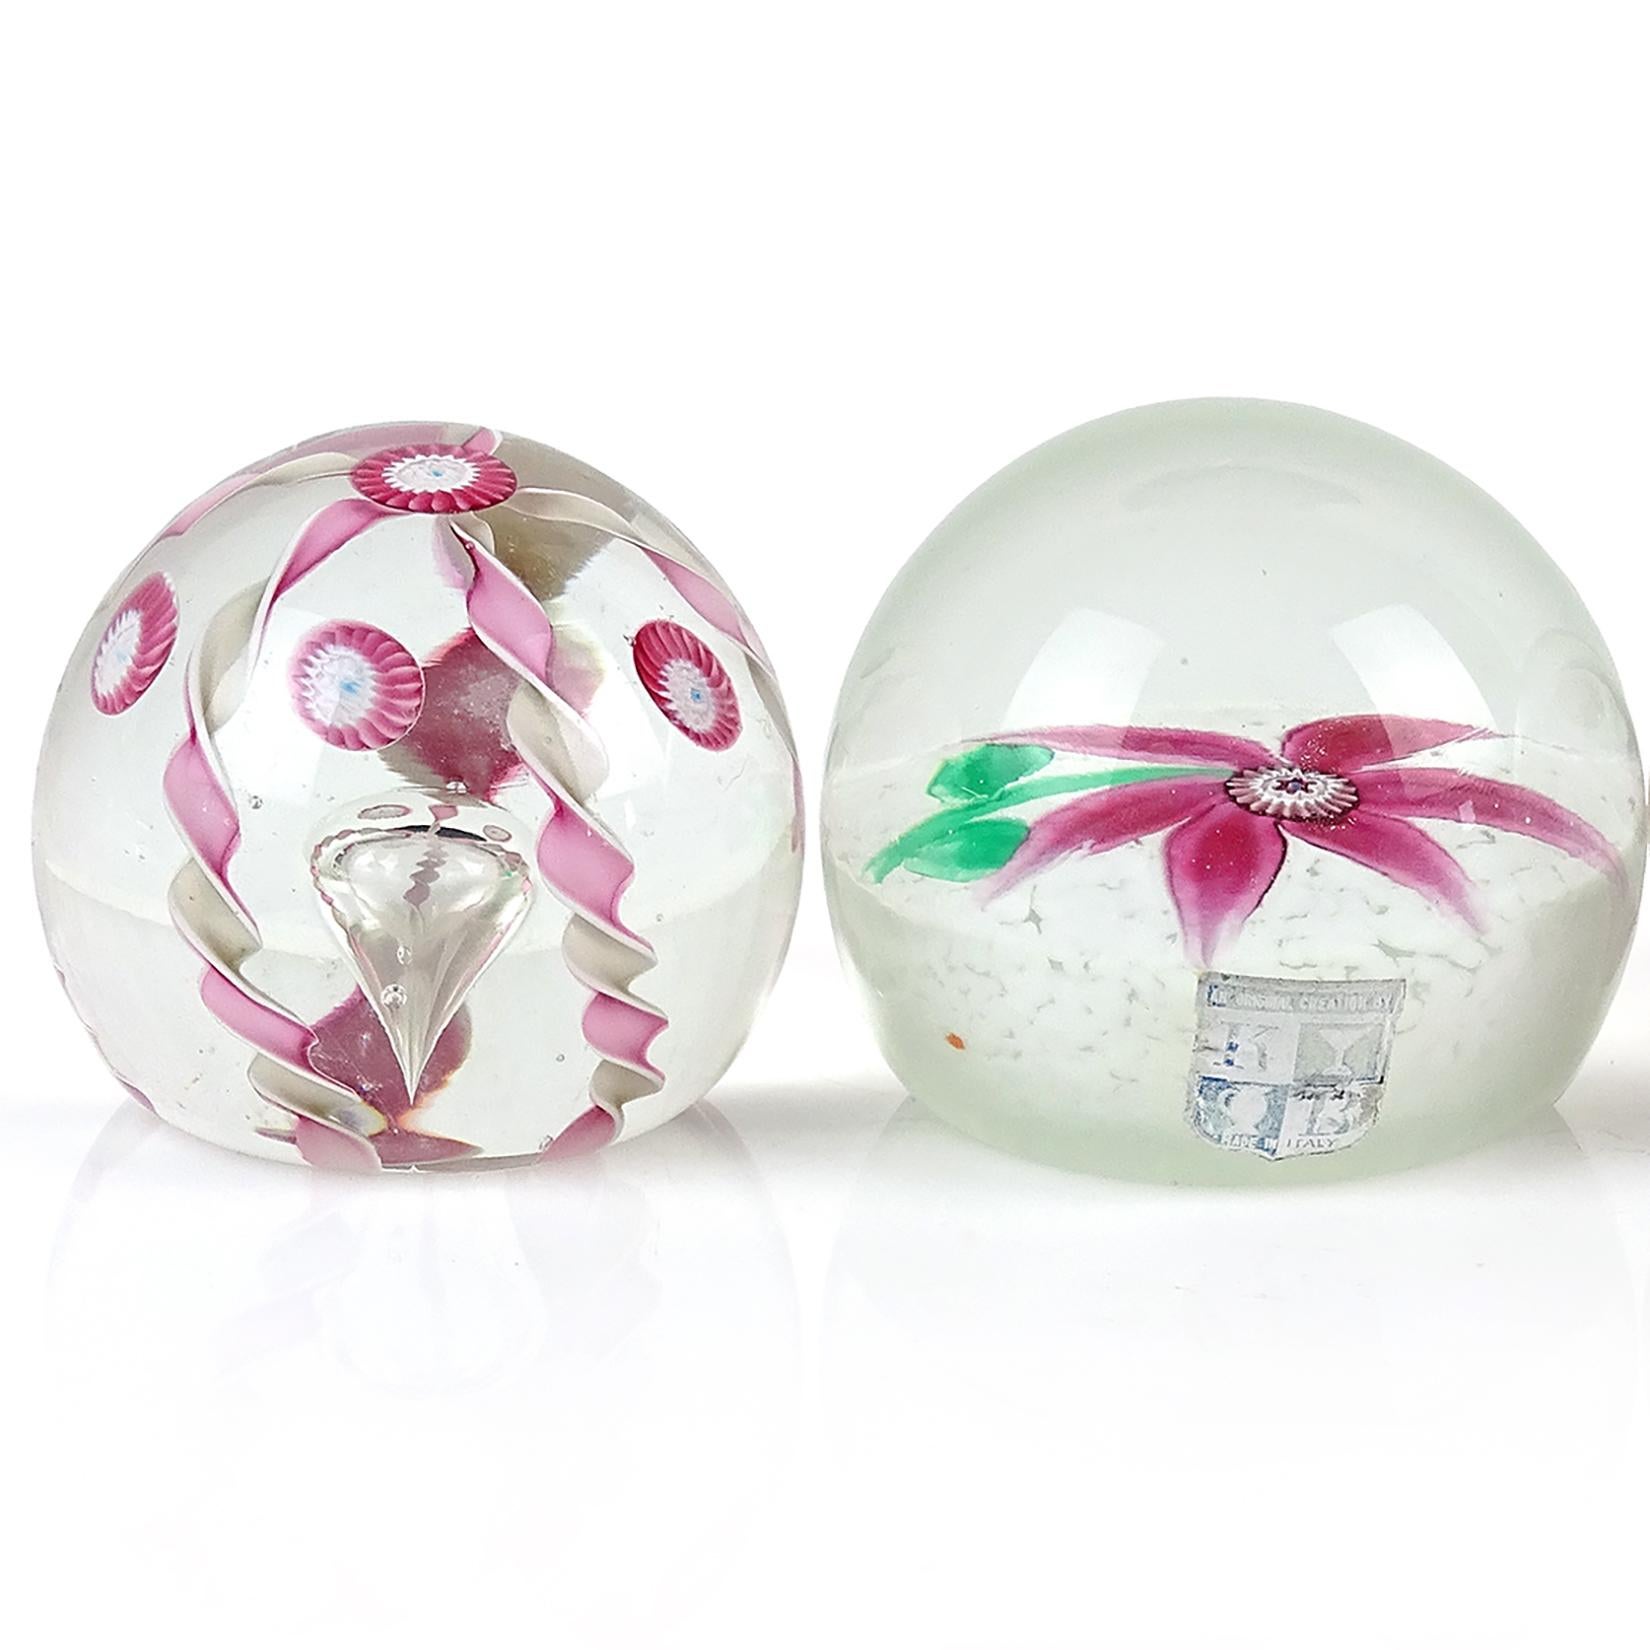 Hand-Crafted Fratelli Toso Murano Pink Flower Ribbons Italian Art Glass Vintage Paperweights